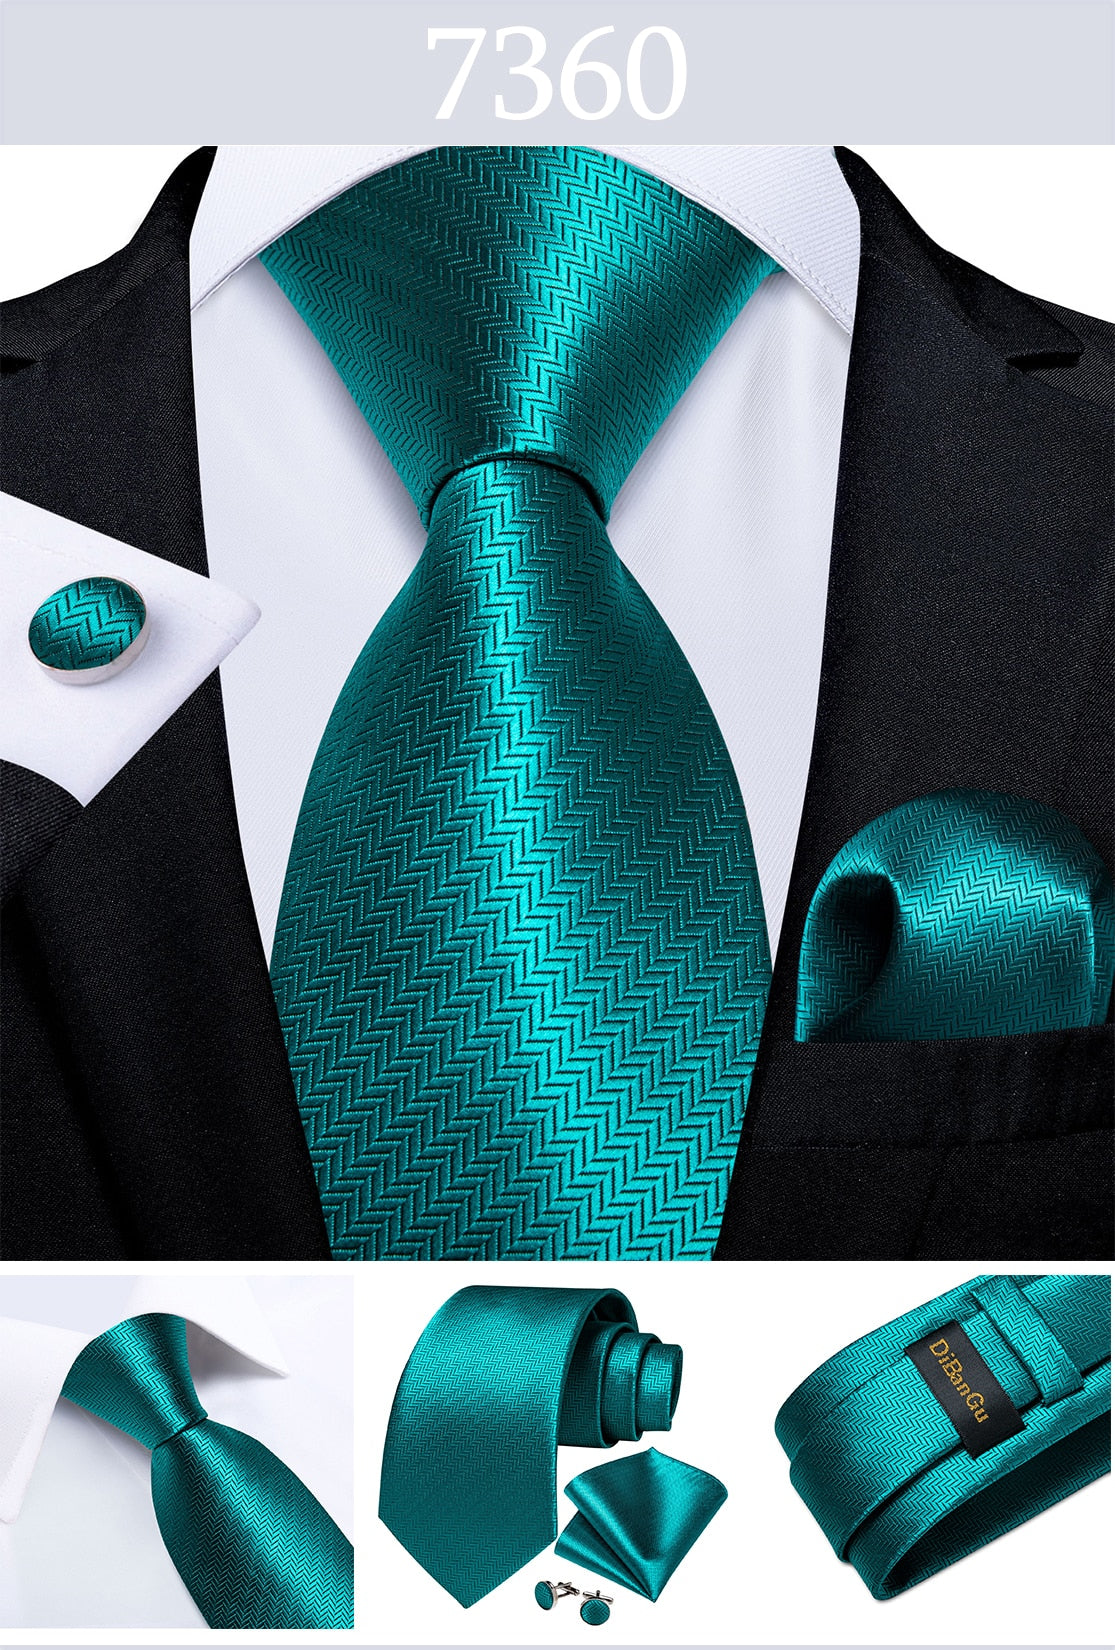 Men's Tie Teal Green Paisley Novelty Design Silk Wedding Tie for Men Handky cufflink Tie Set Party Business Fashion Set The Clothing Company Sydney